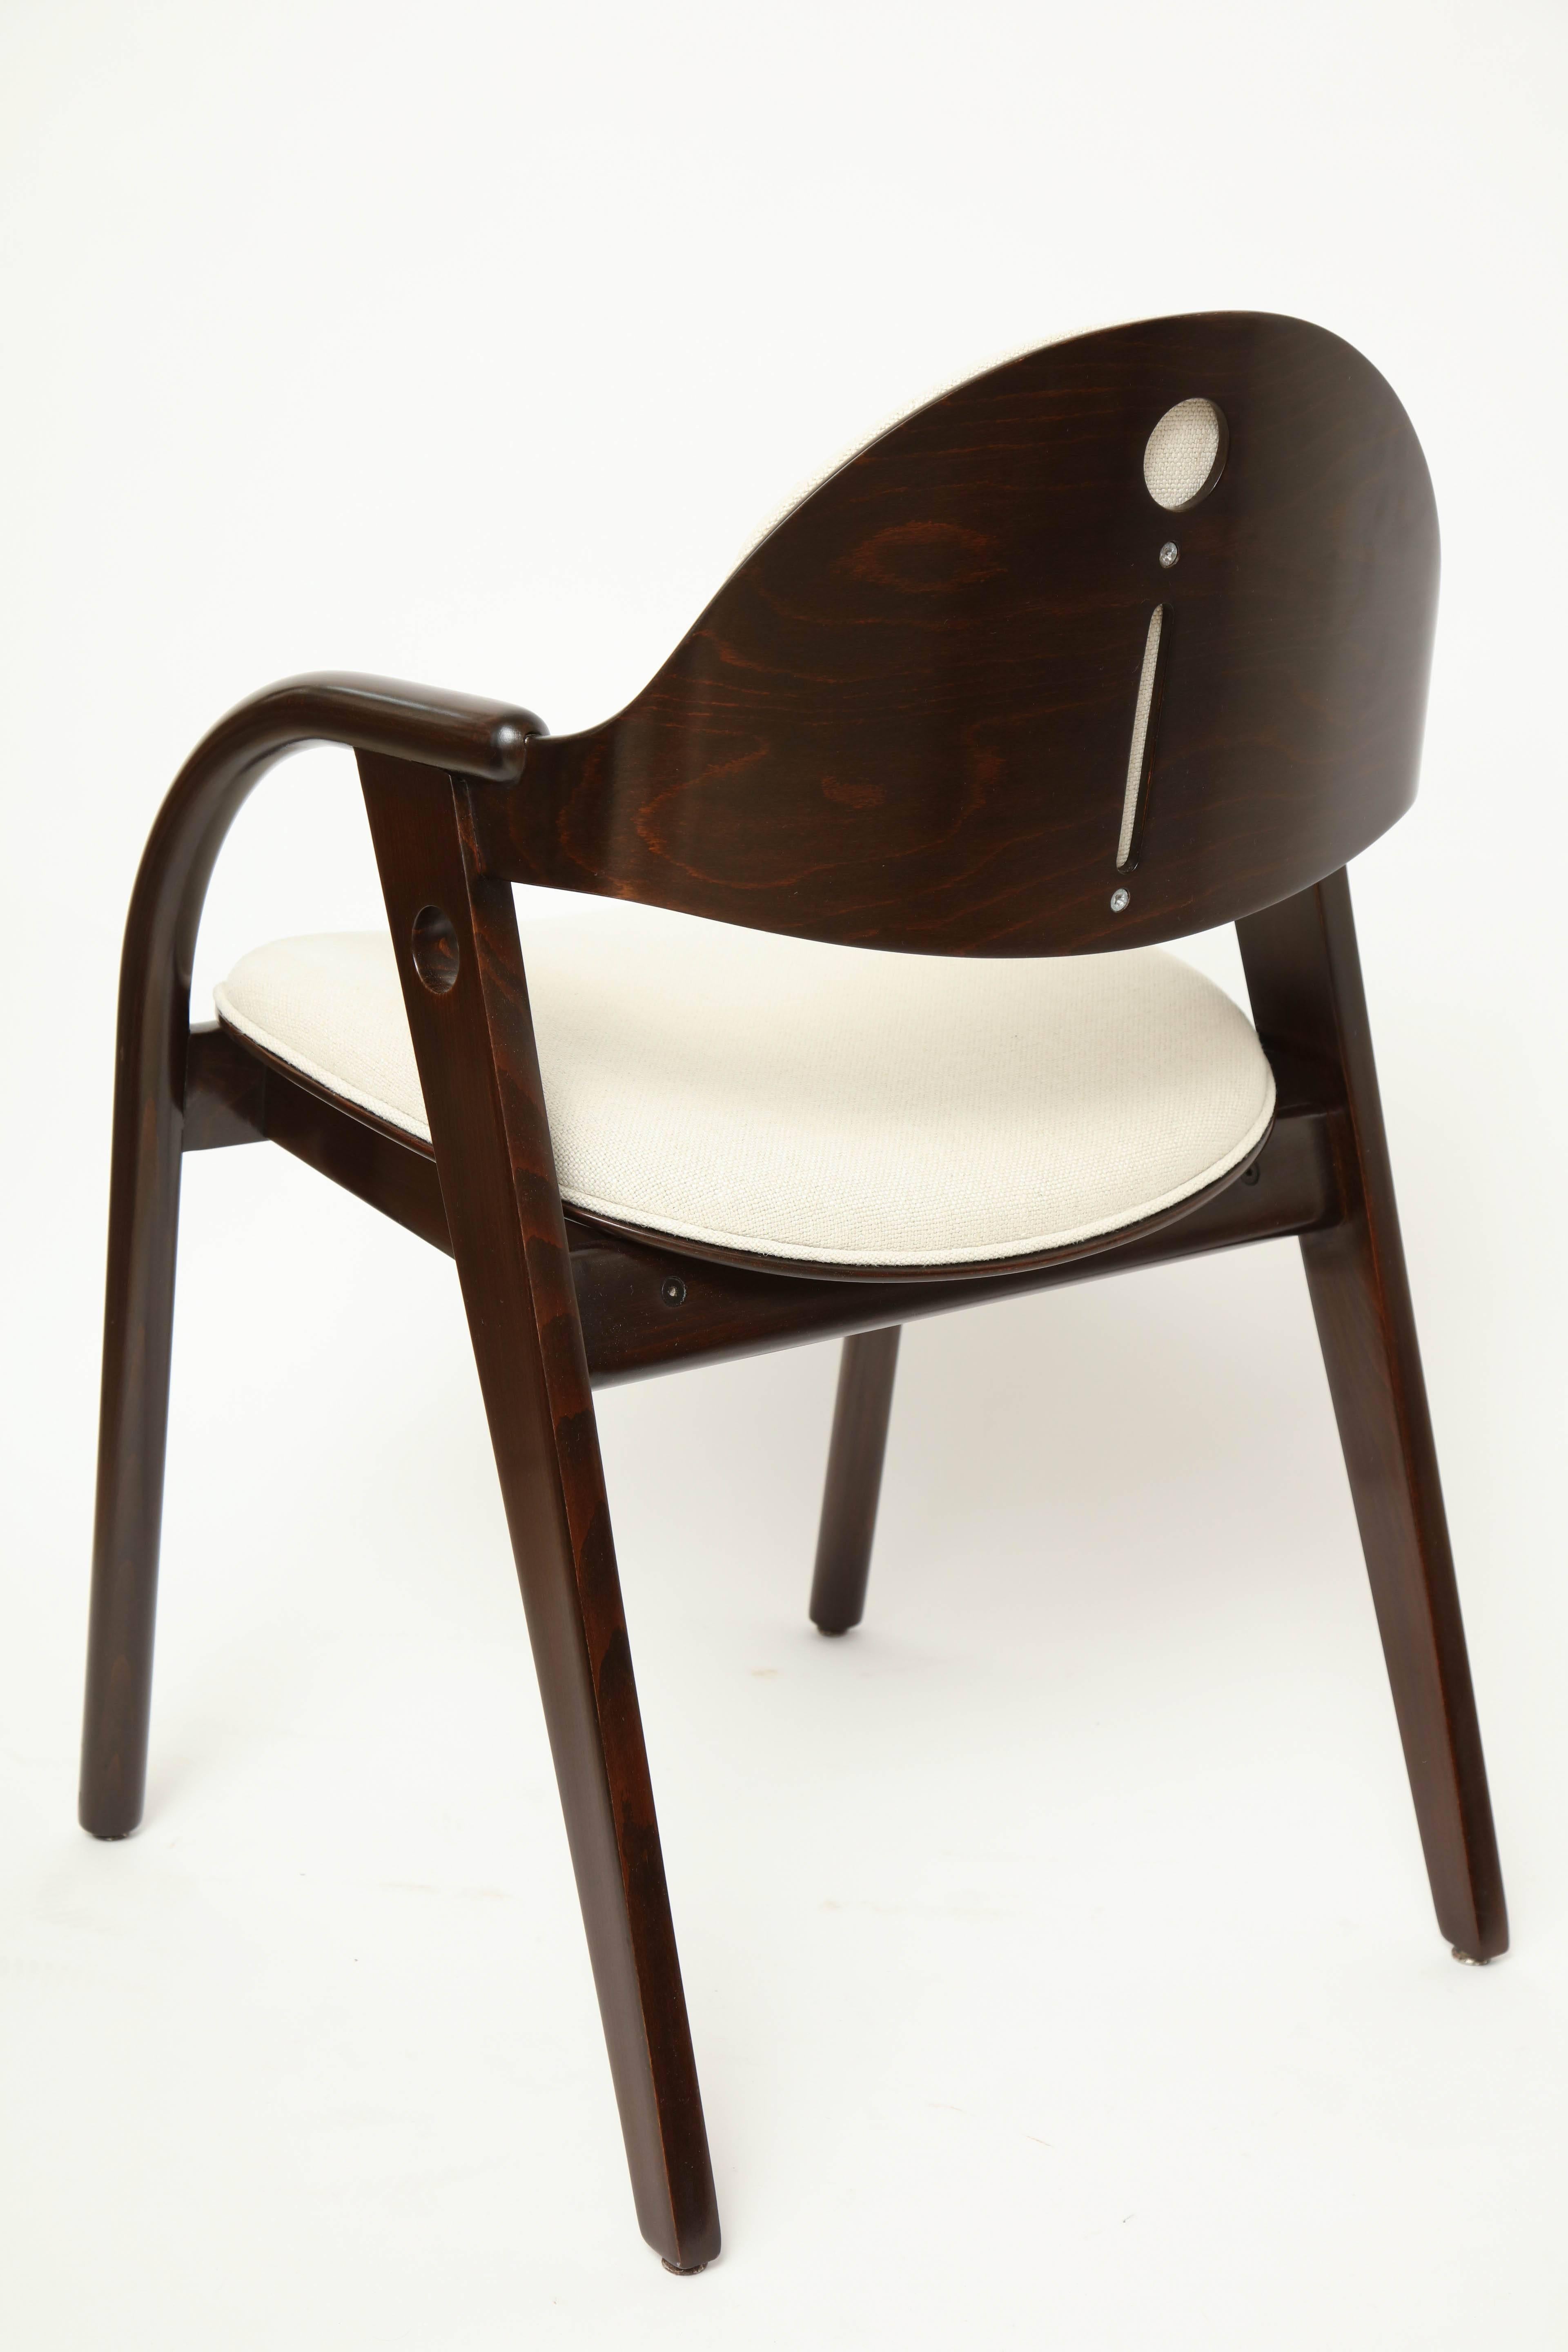 Mid-20th Century Set of Four Mid-Century Modern Dark Wood Chairs with Upholstered Seats For Sale